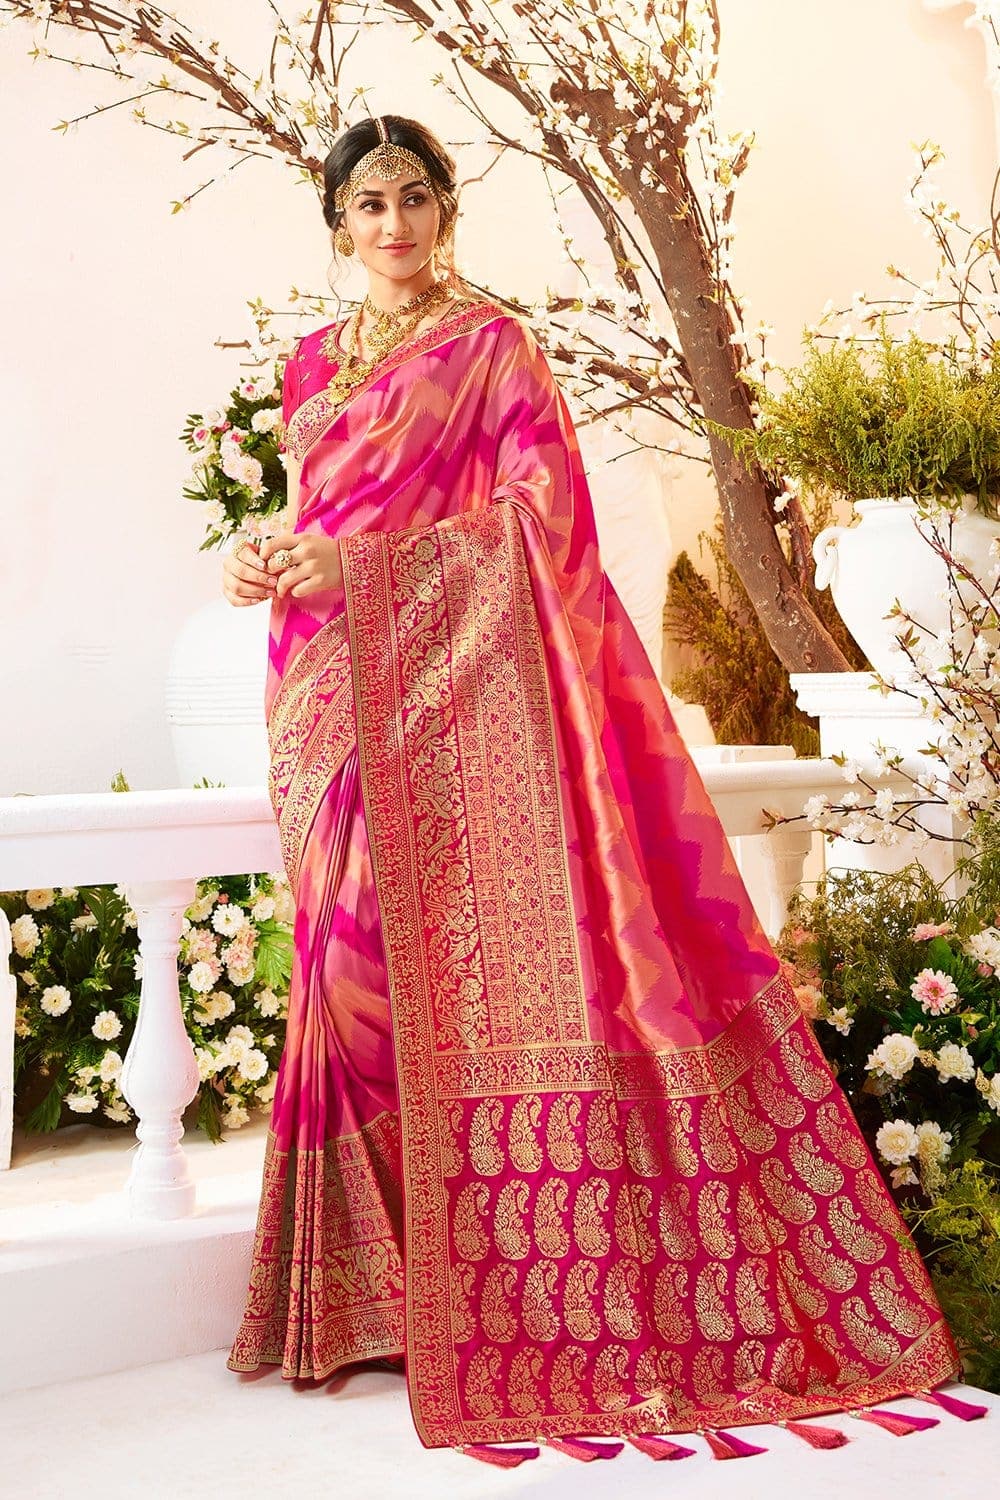 Shades of pink woven designer banarasi saree with embroidered silk blouse - Wedding sutra collection - Buy online on Karagiri - Free shipping to USA